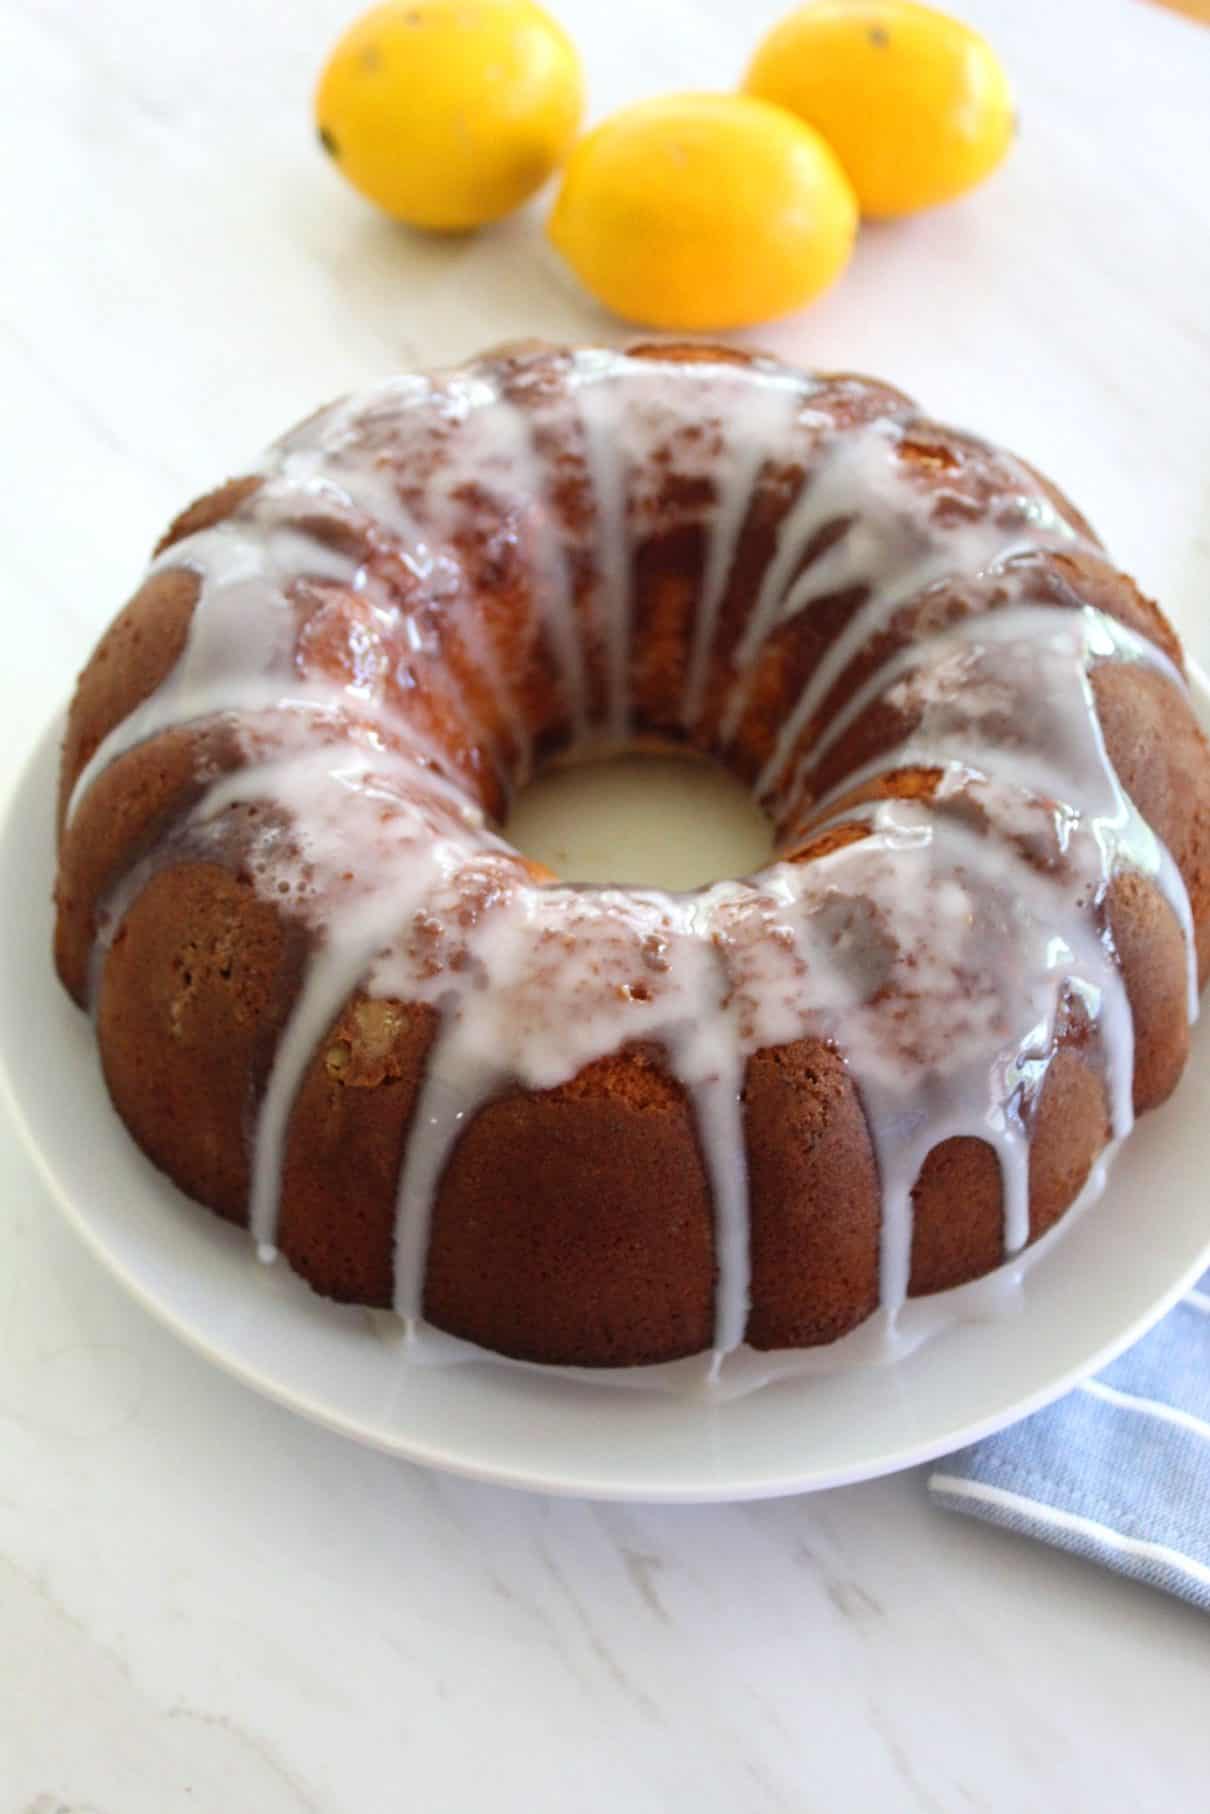 A round platter showing a Meyer Lemon bundt  cake with fresh icing dripping down on the sides. Fresh lemons are shown in the background.